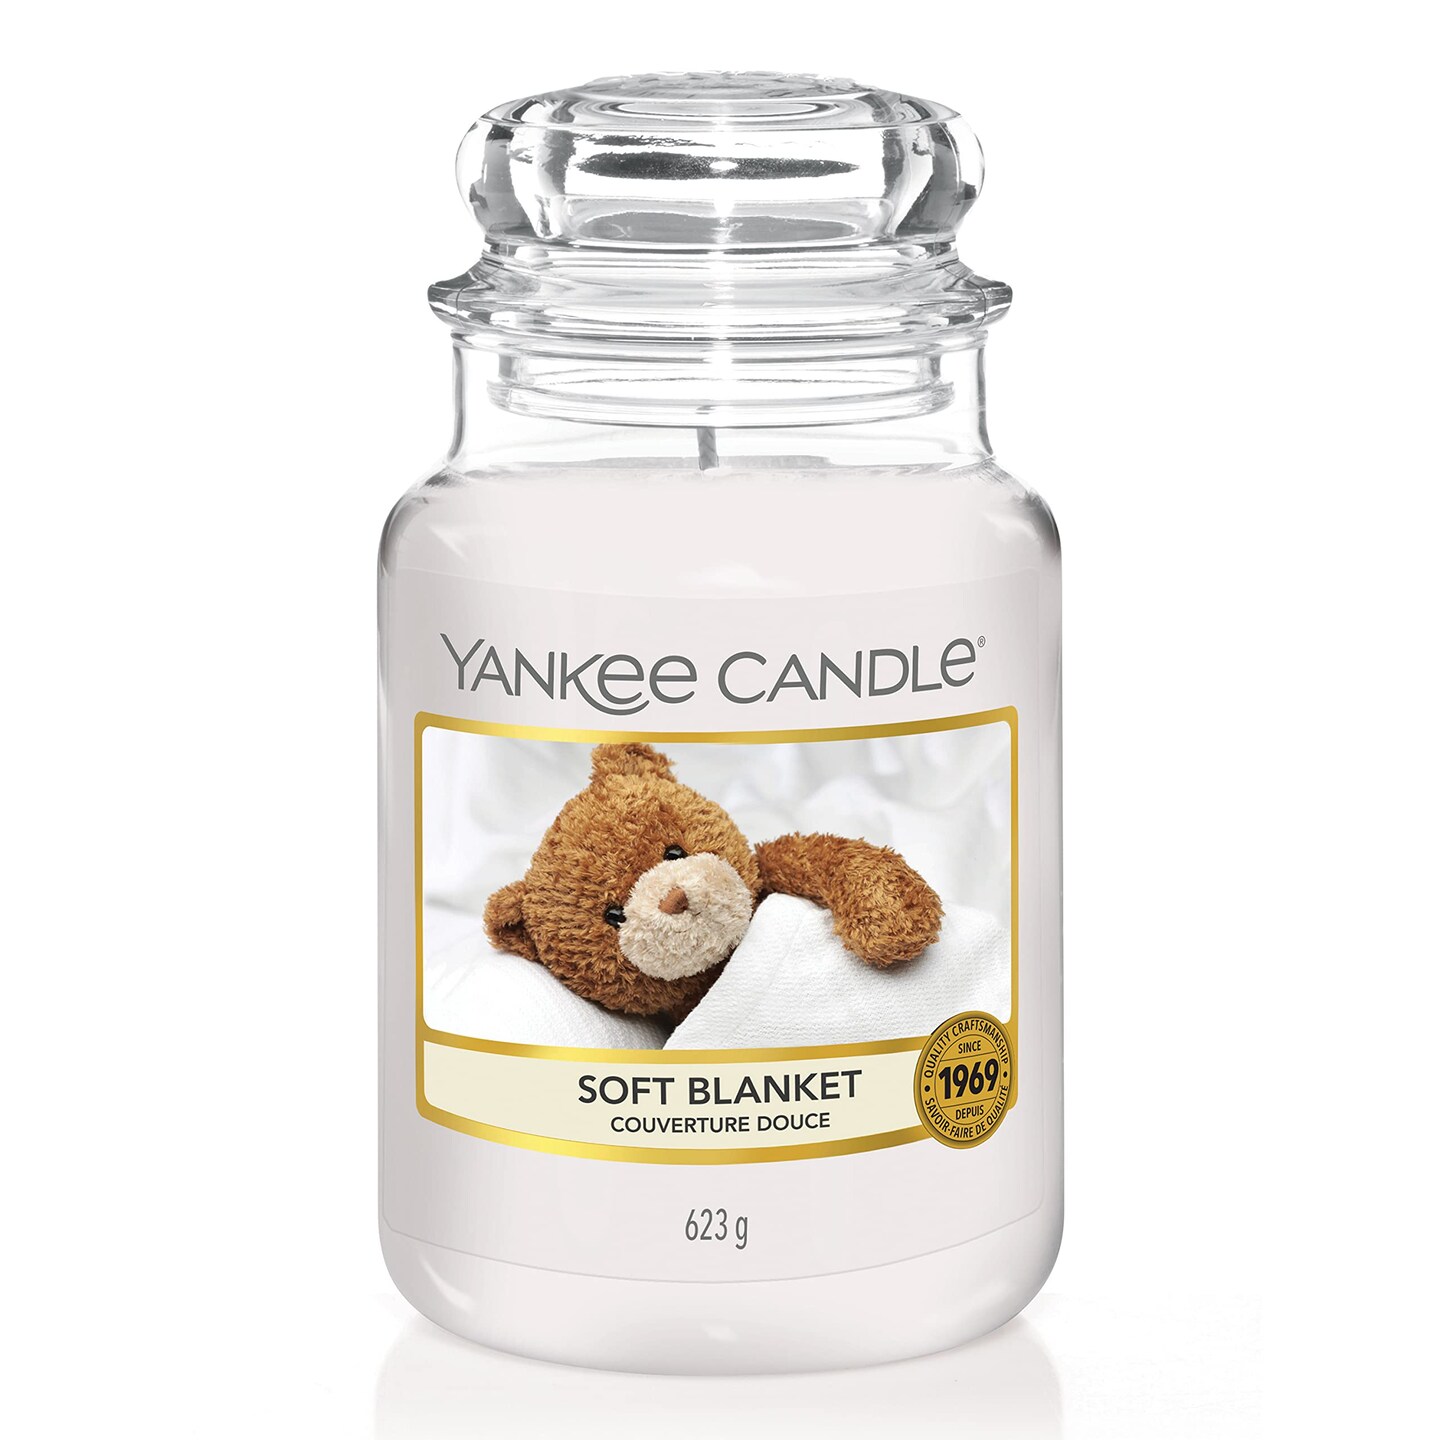 Scented Candle Yankee Candle Collection - Large & Small Jar